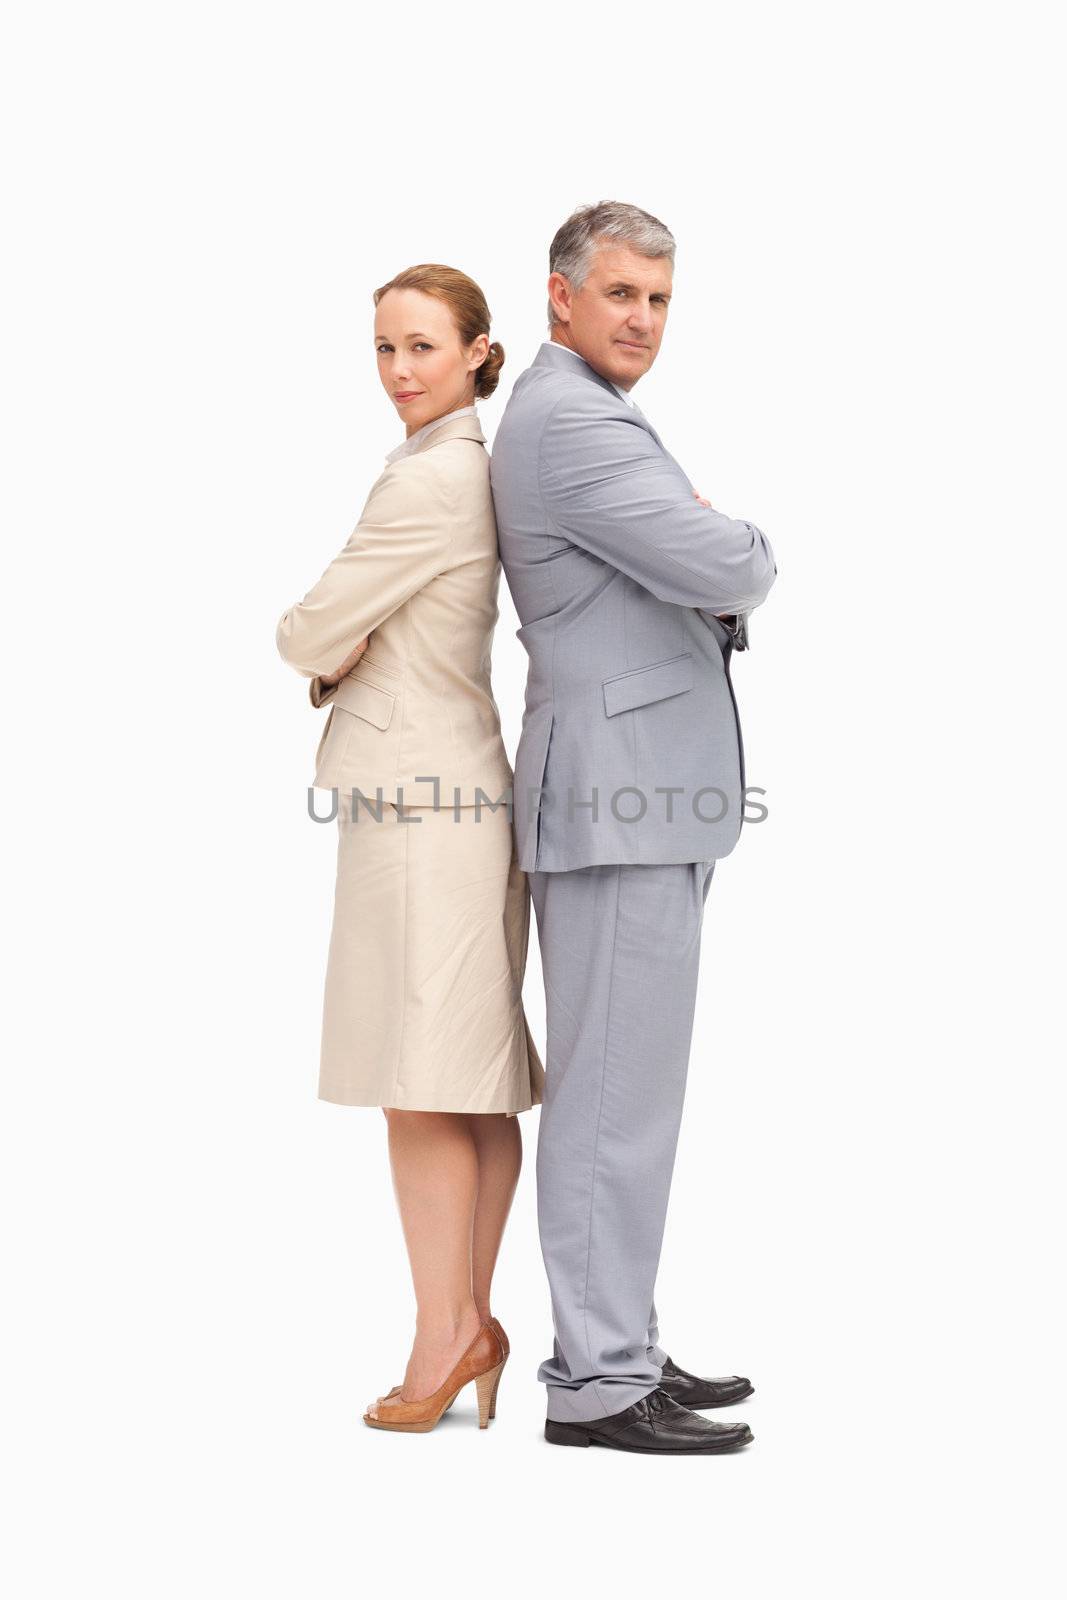 Portrait of business people back to back by Wavebreakmedia